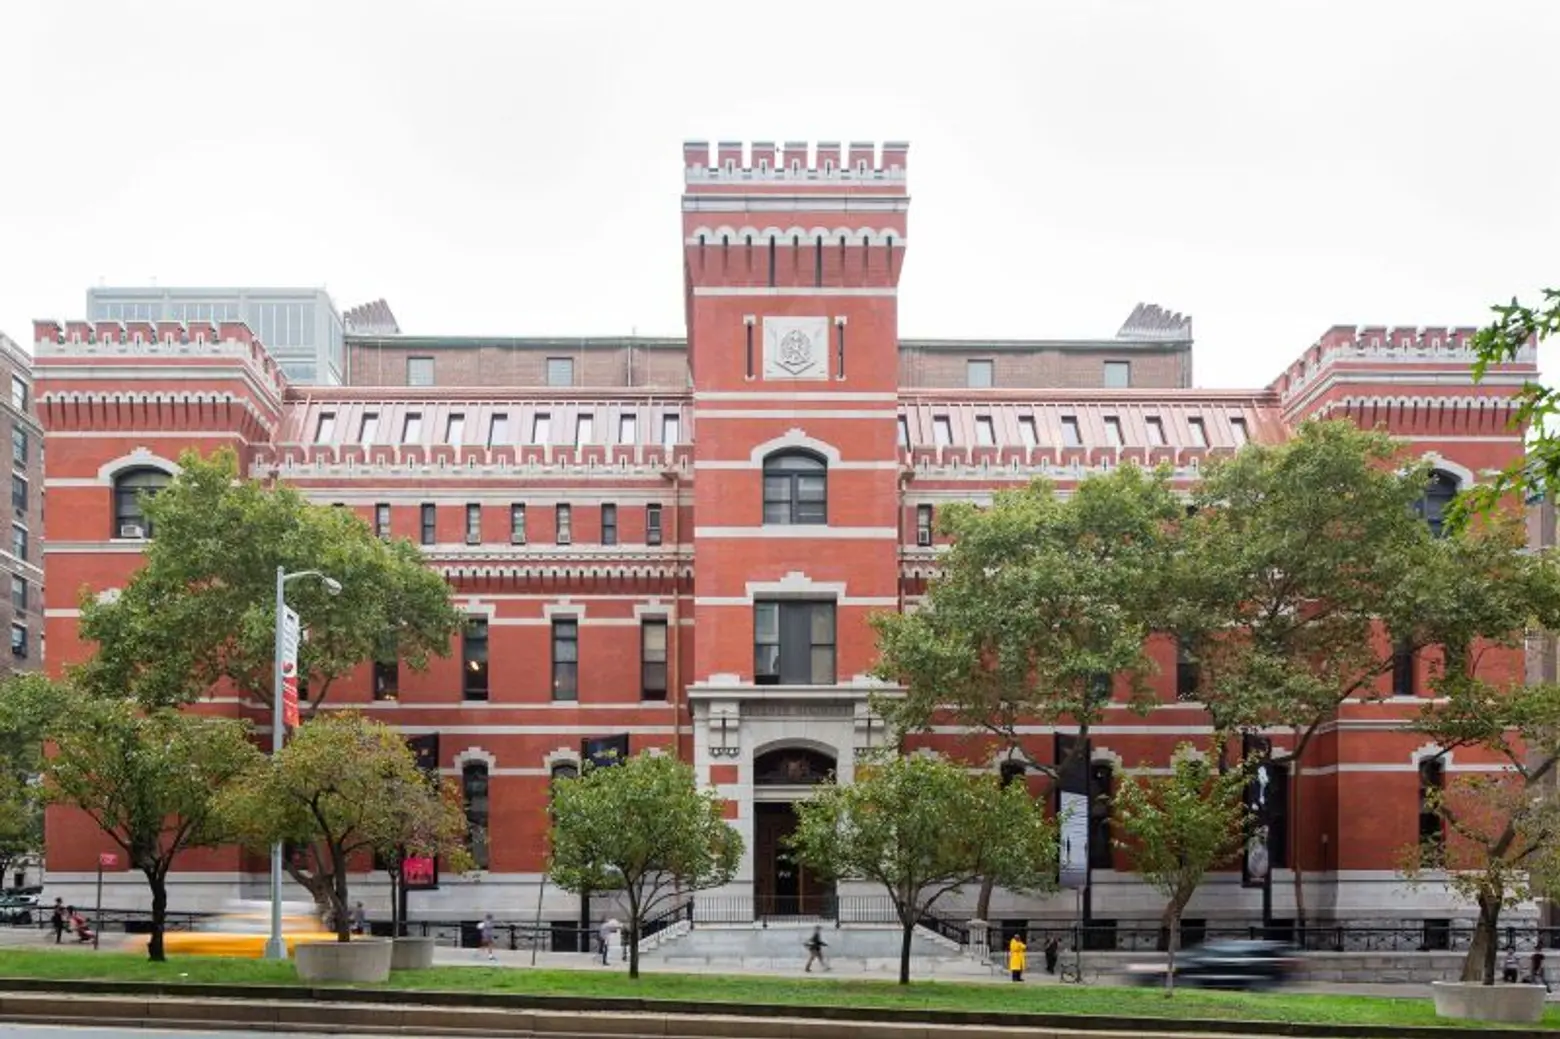 Redeveloping NYC’s armories: When adaptive reuse and community building bring controversy